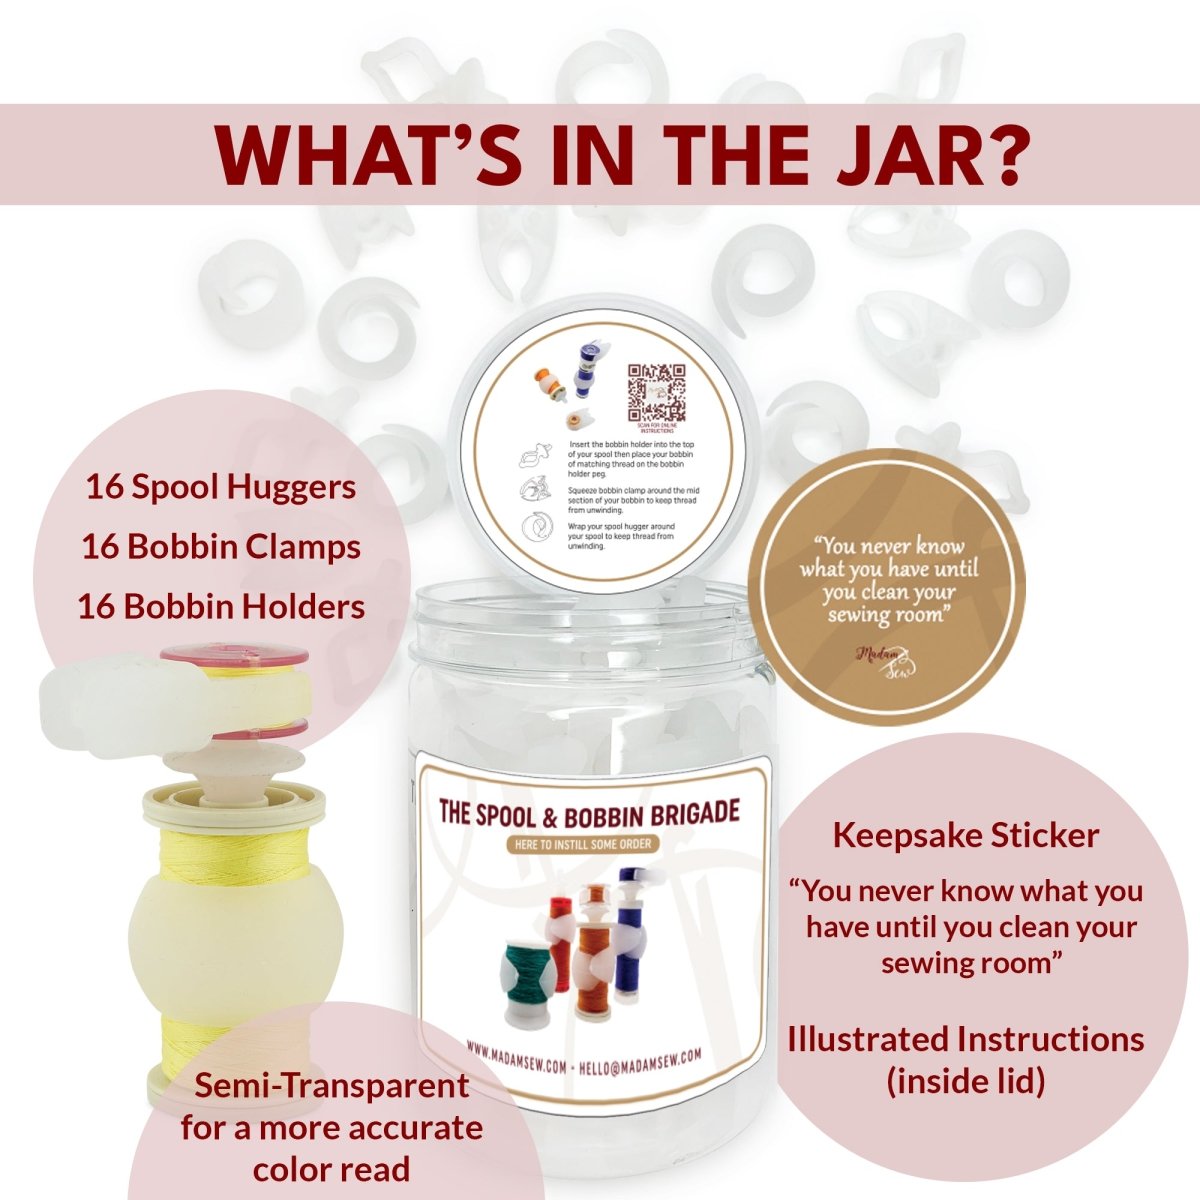 infographic about the spool and bobbin organizers and what comes in the jar